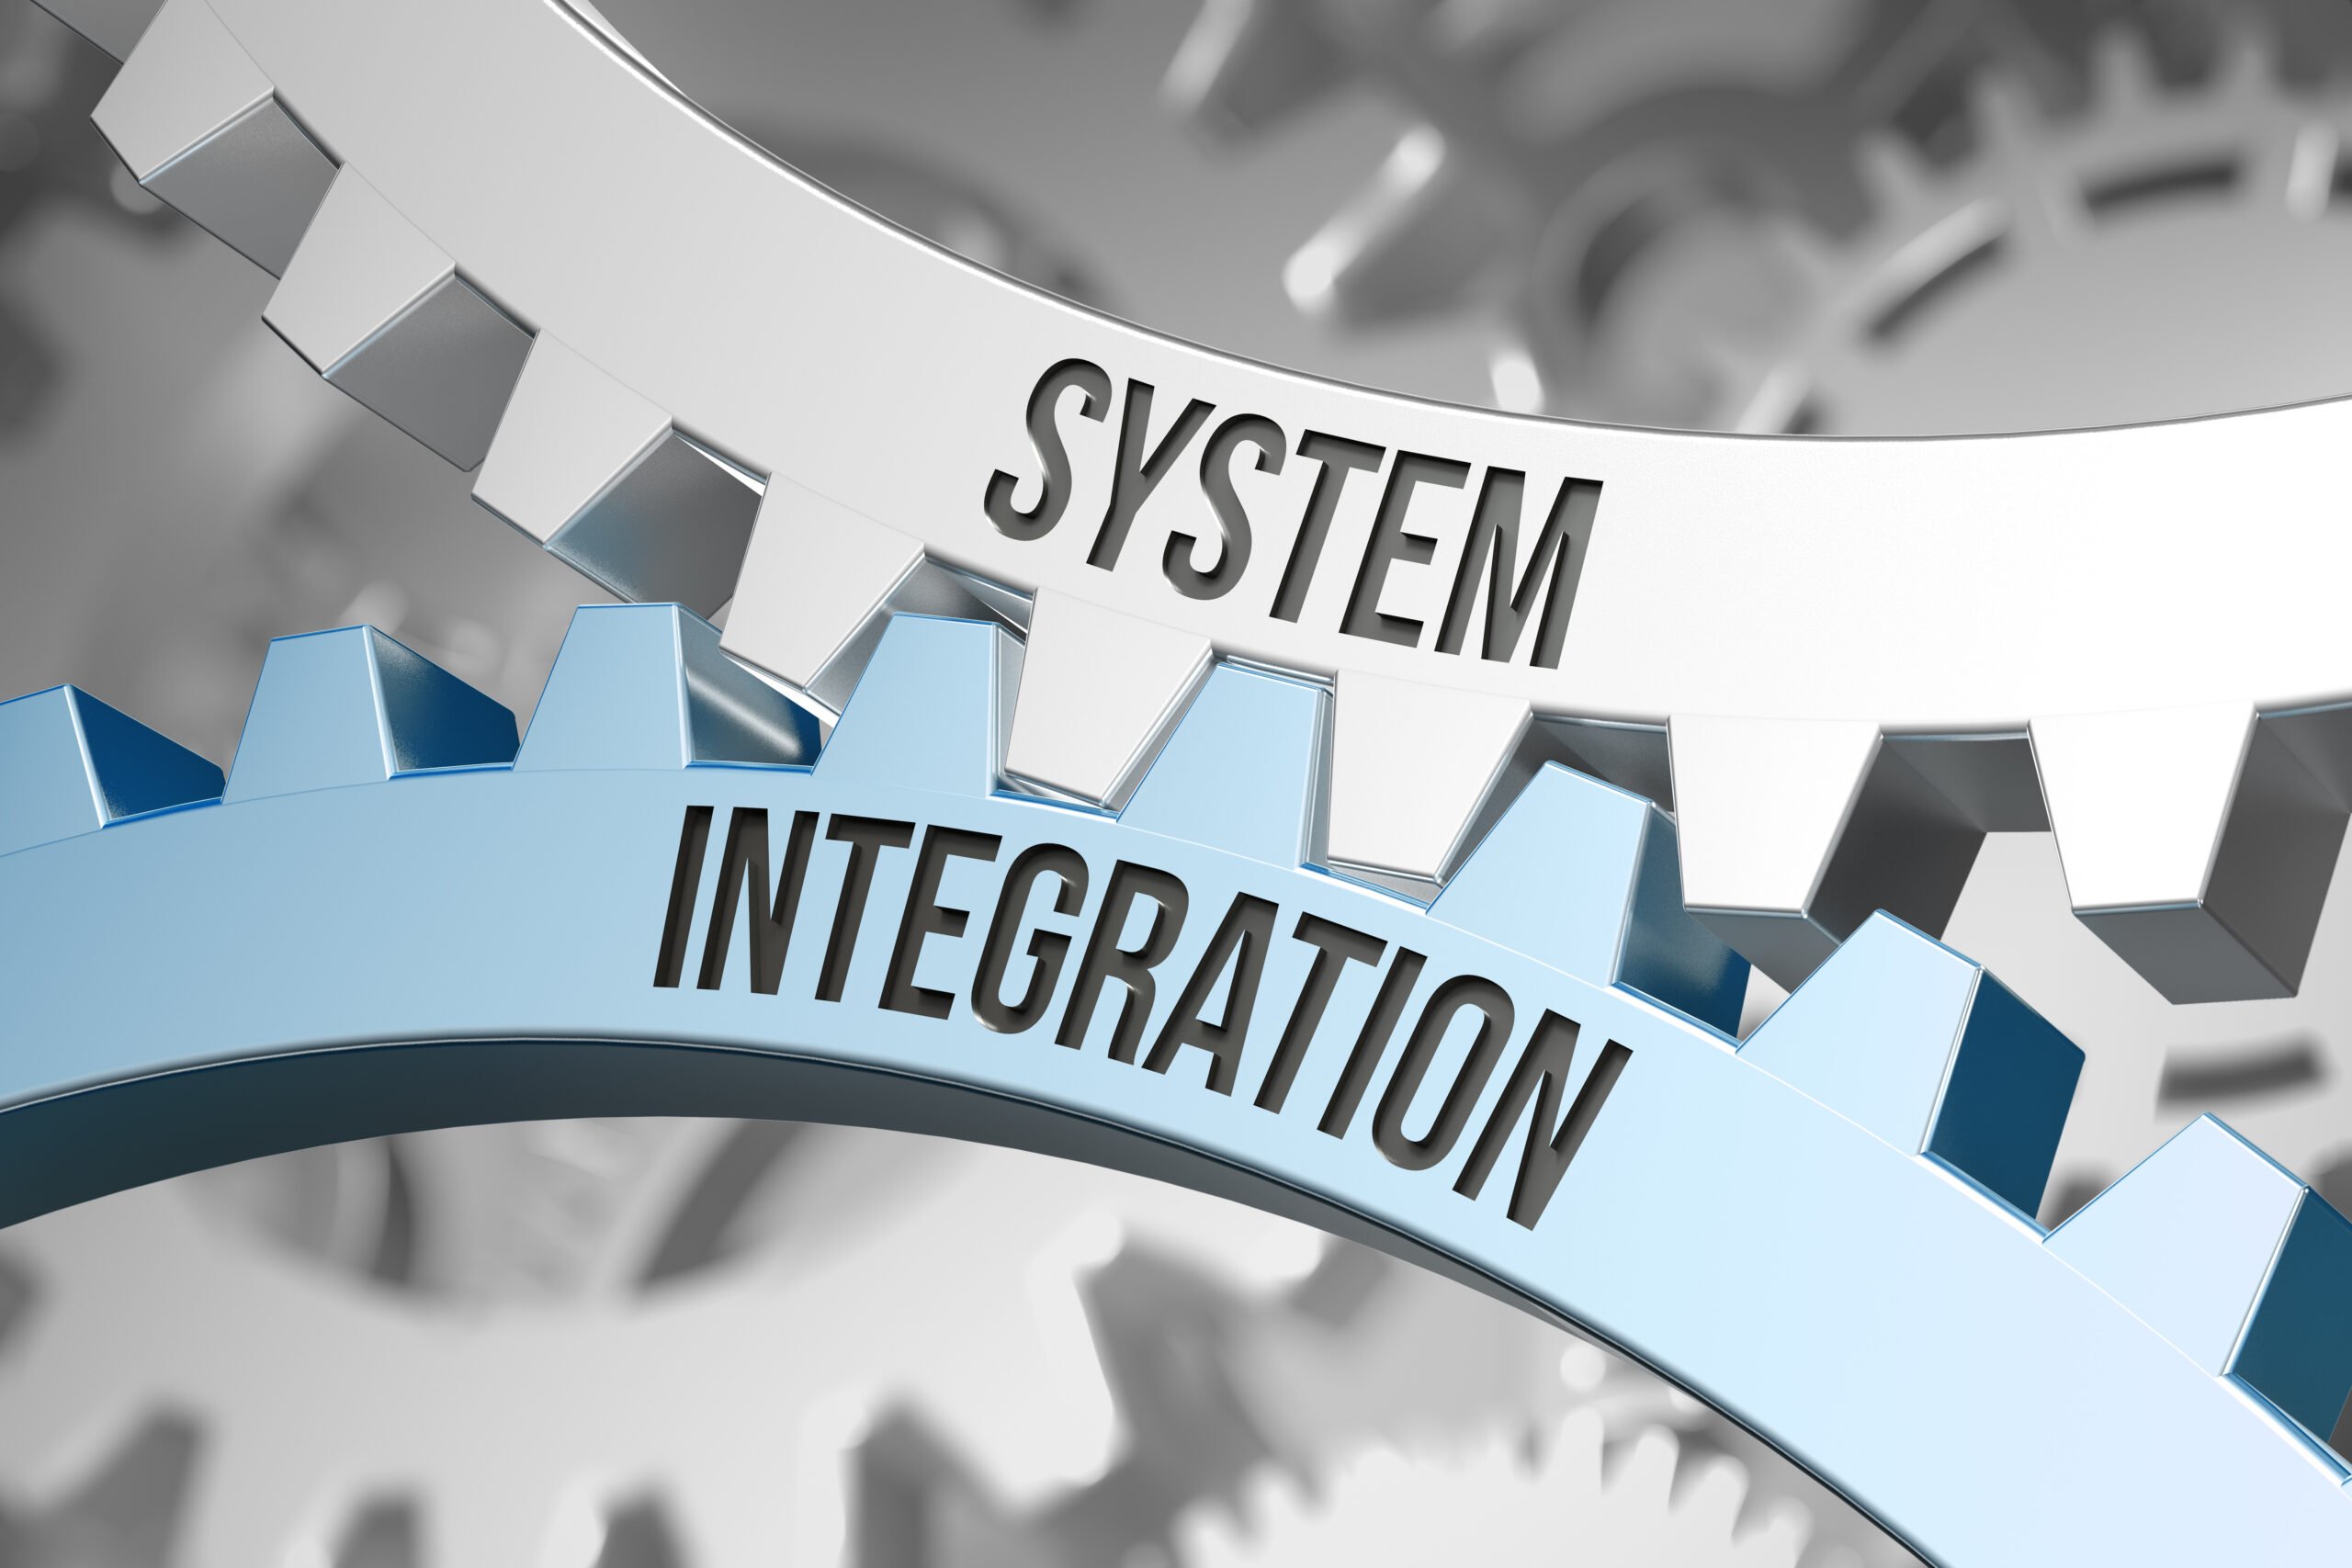 System Integration-Gers-and-Wheels-Interlocking-Cogs